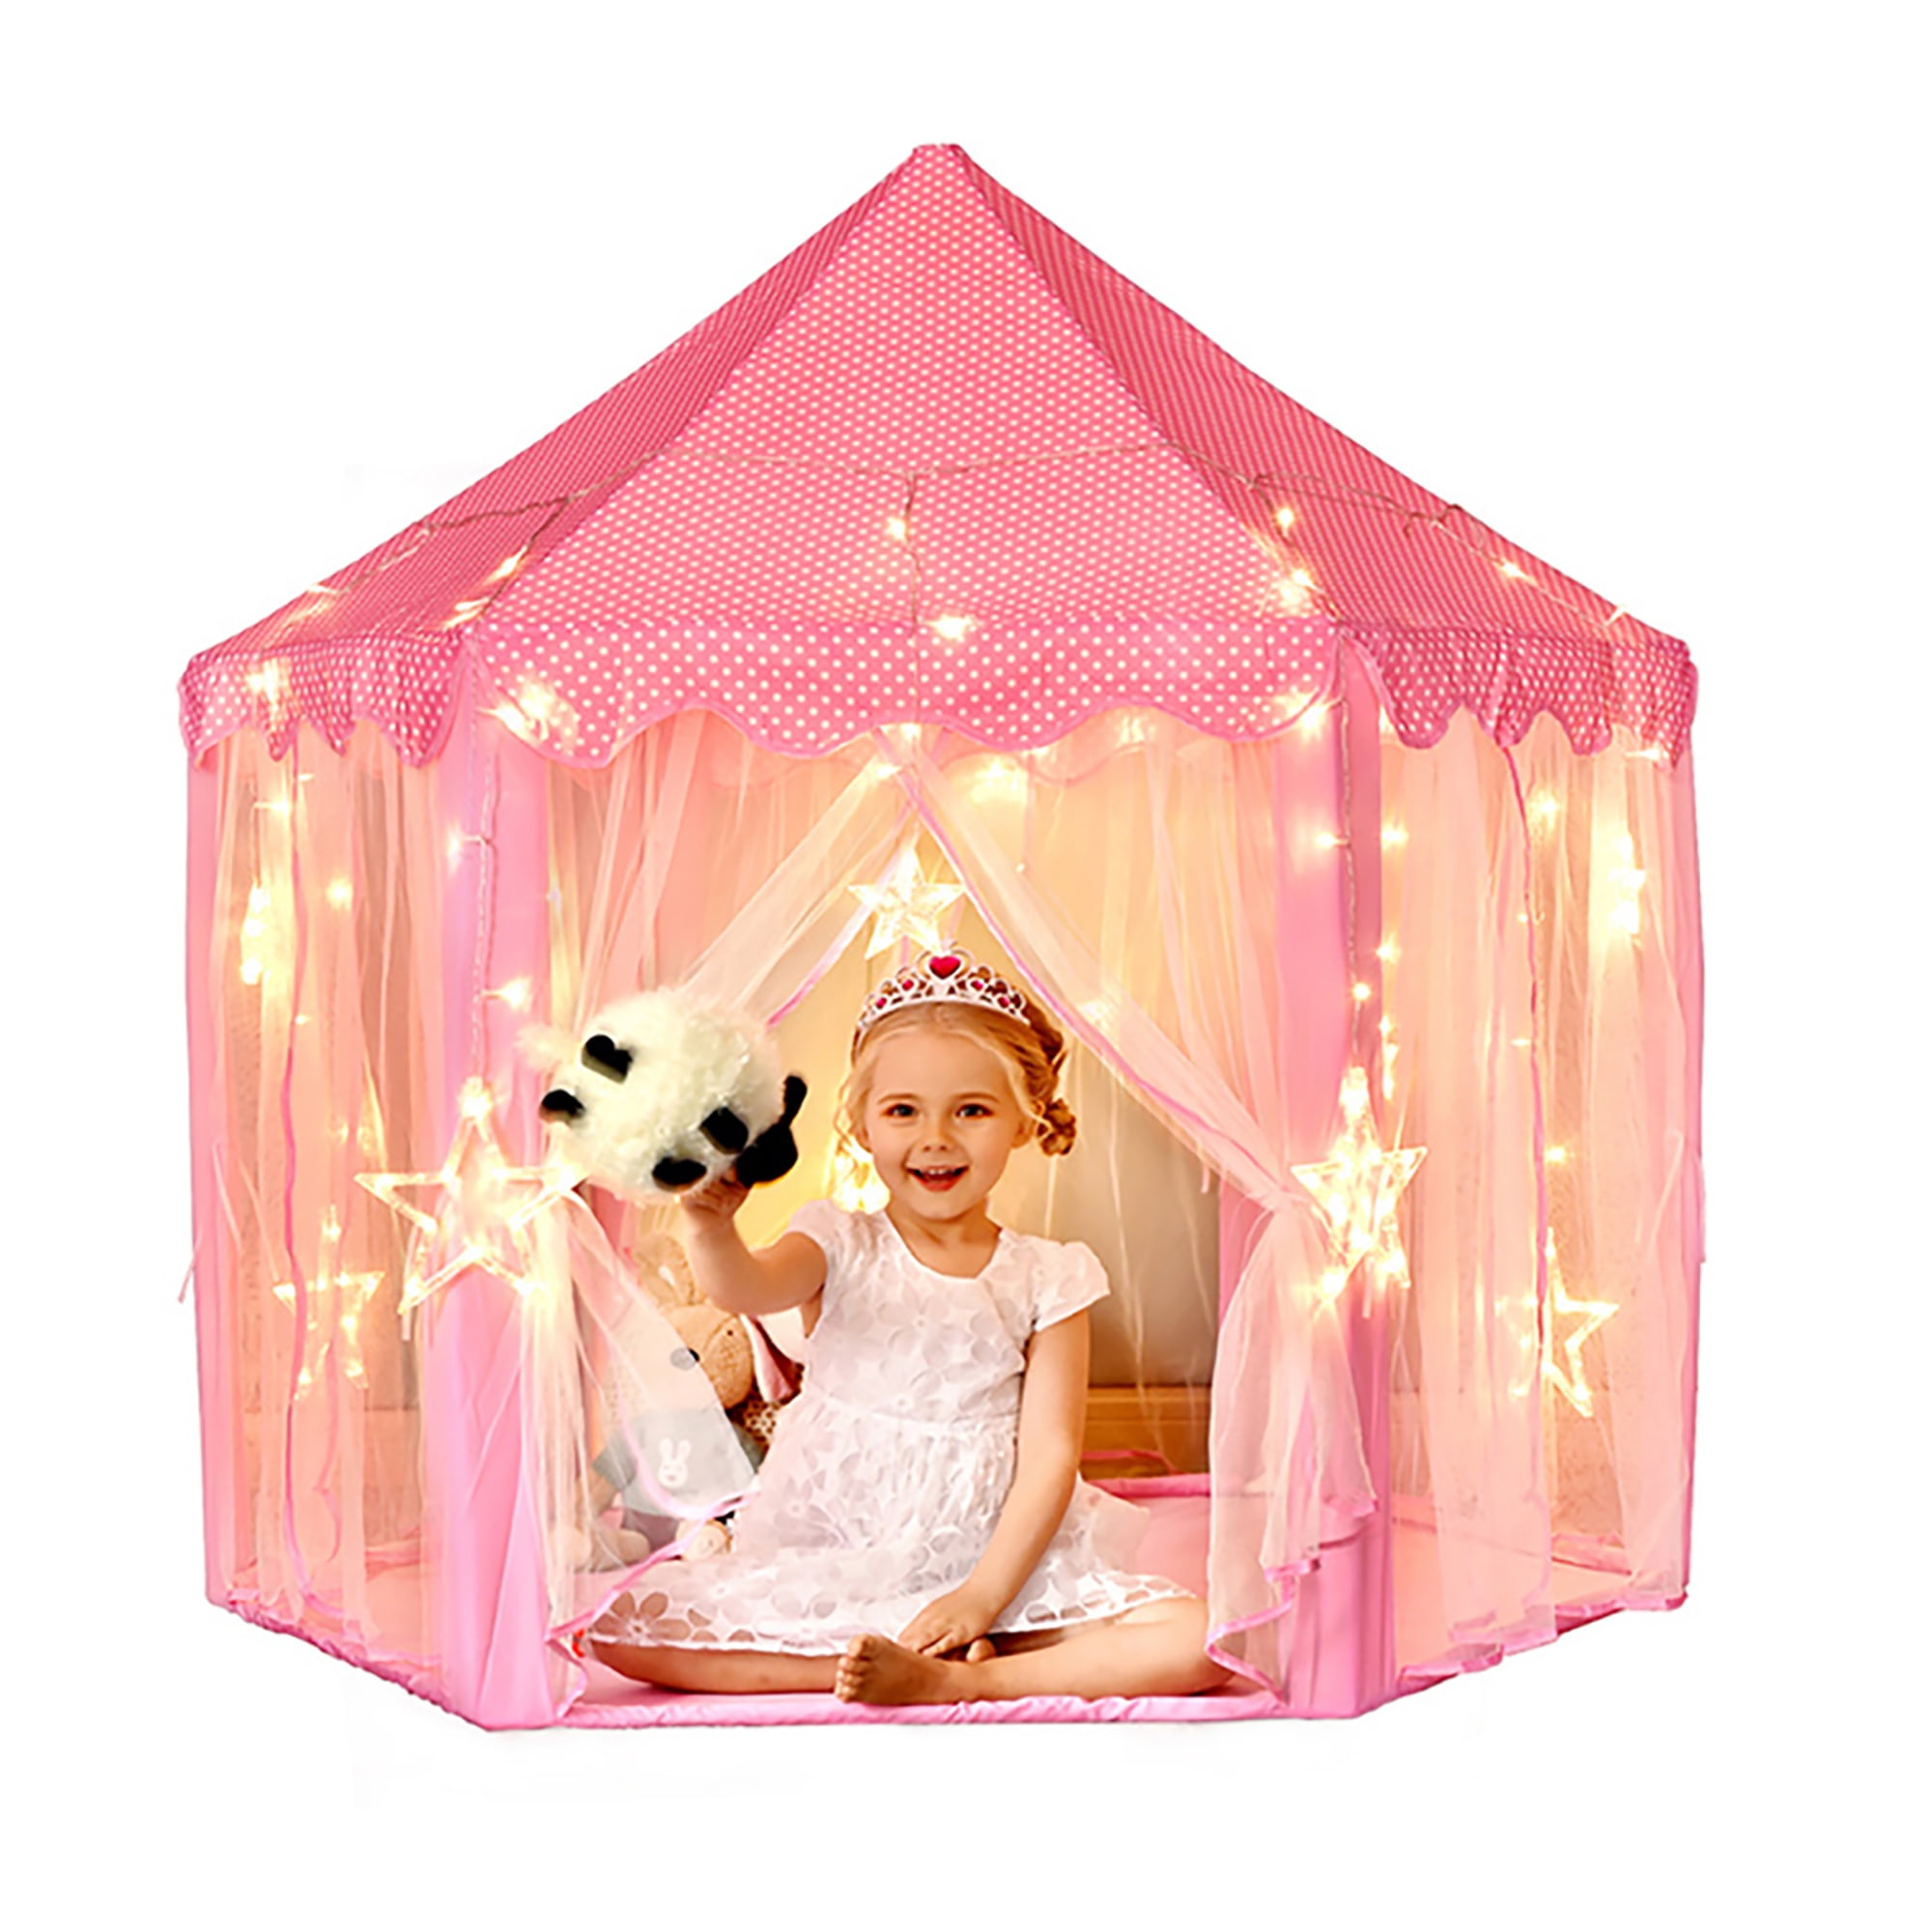 String Lights Gifts Girls Pink Princess Castle Cute Playhouse Play Tent Rug 